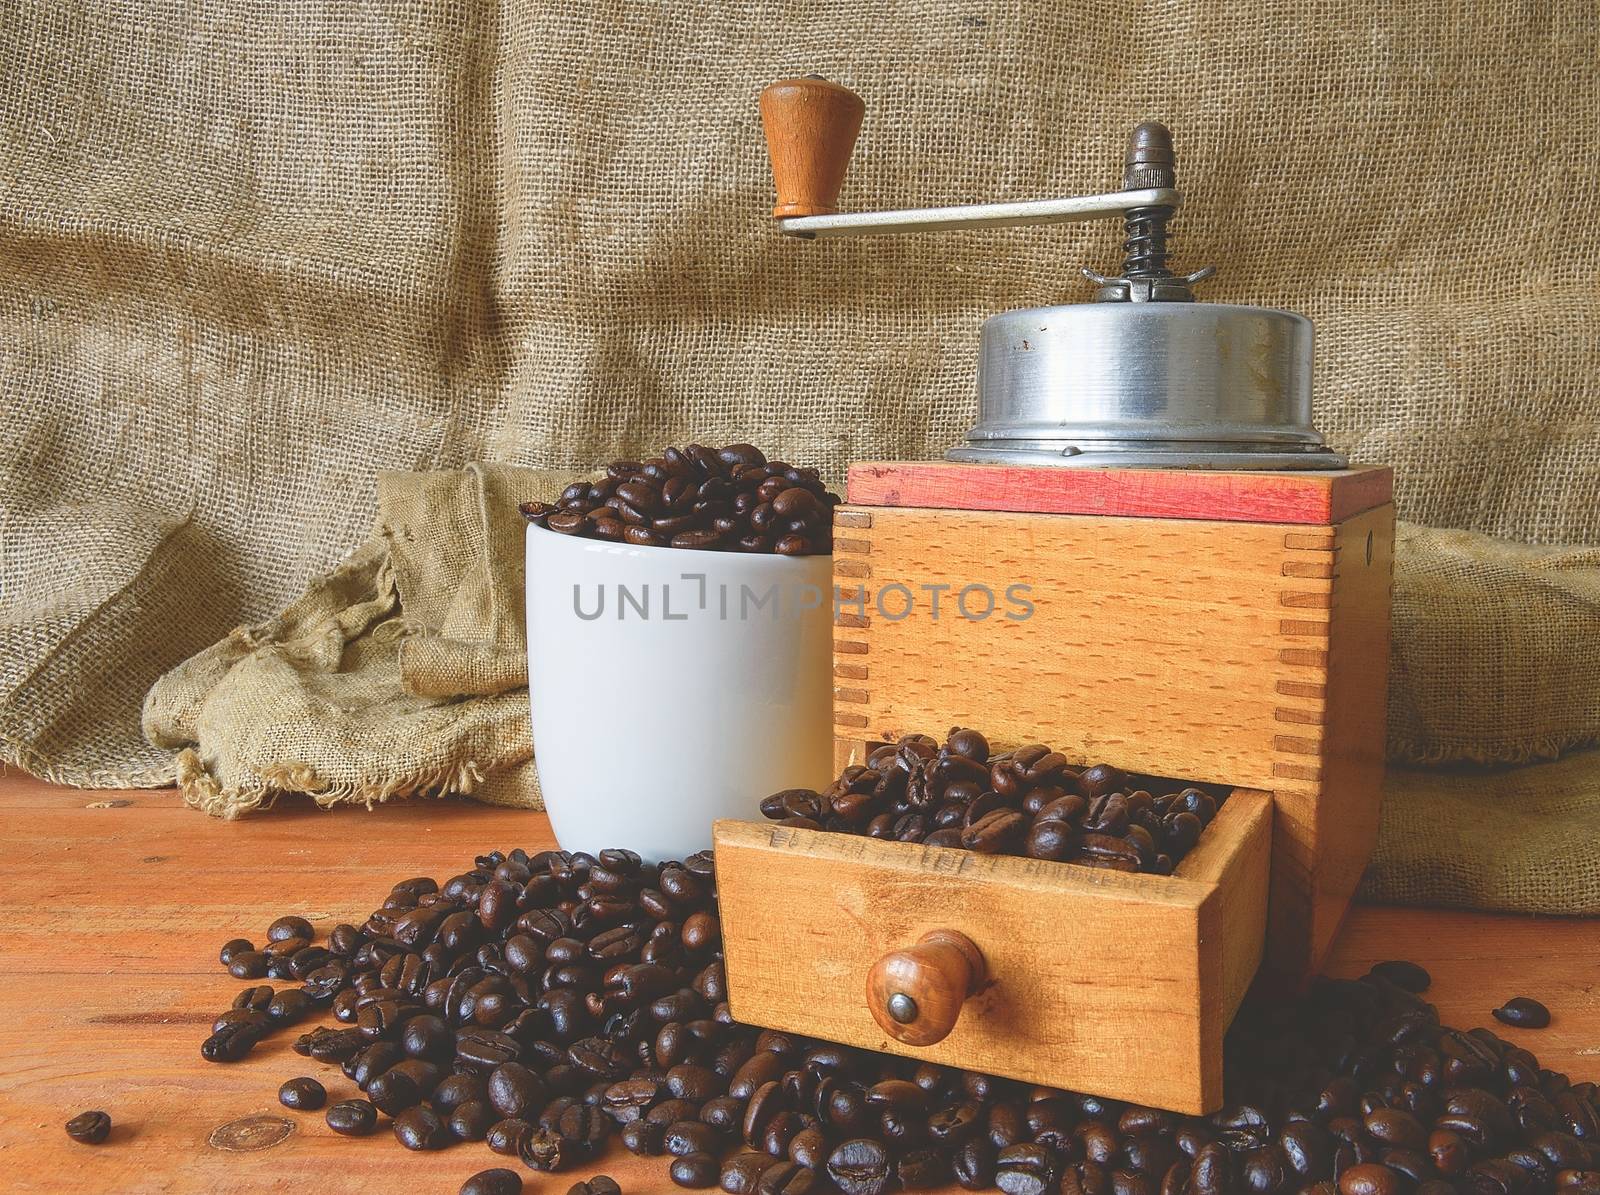 Vintage coffee mill, coffee beans and white cup filled coffee beans on wooden background. 